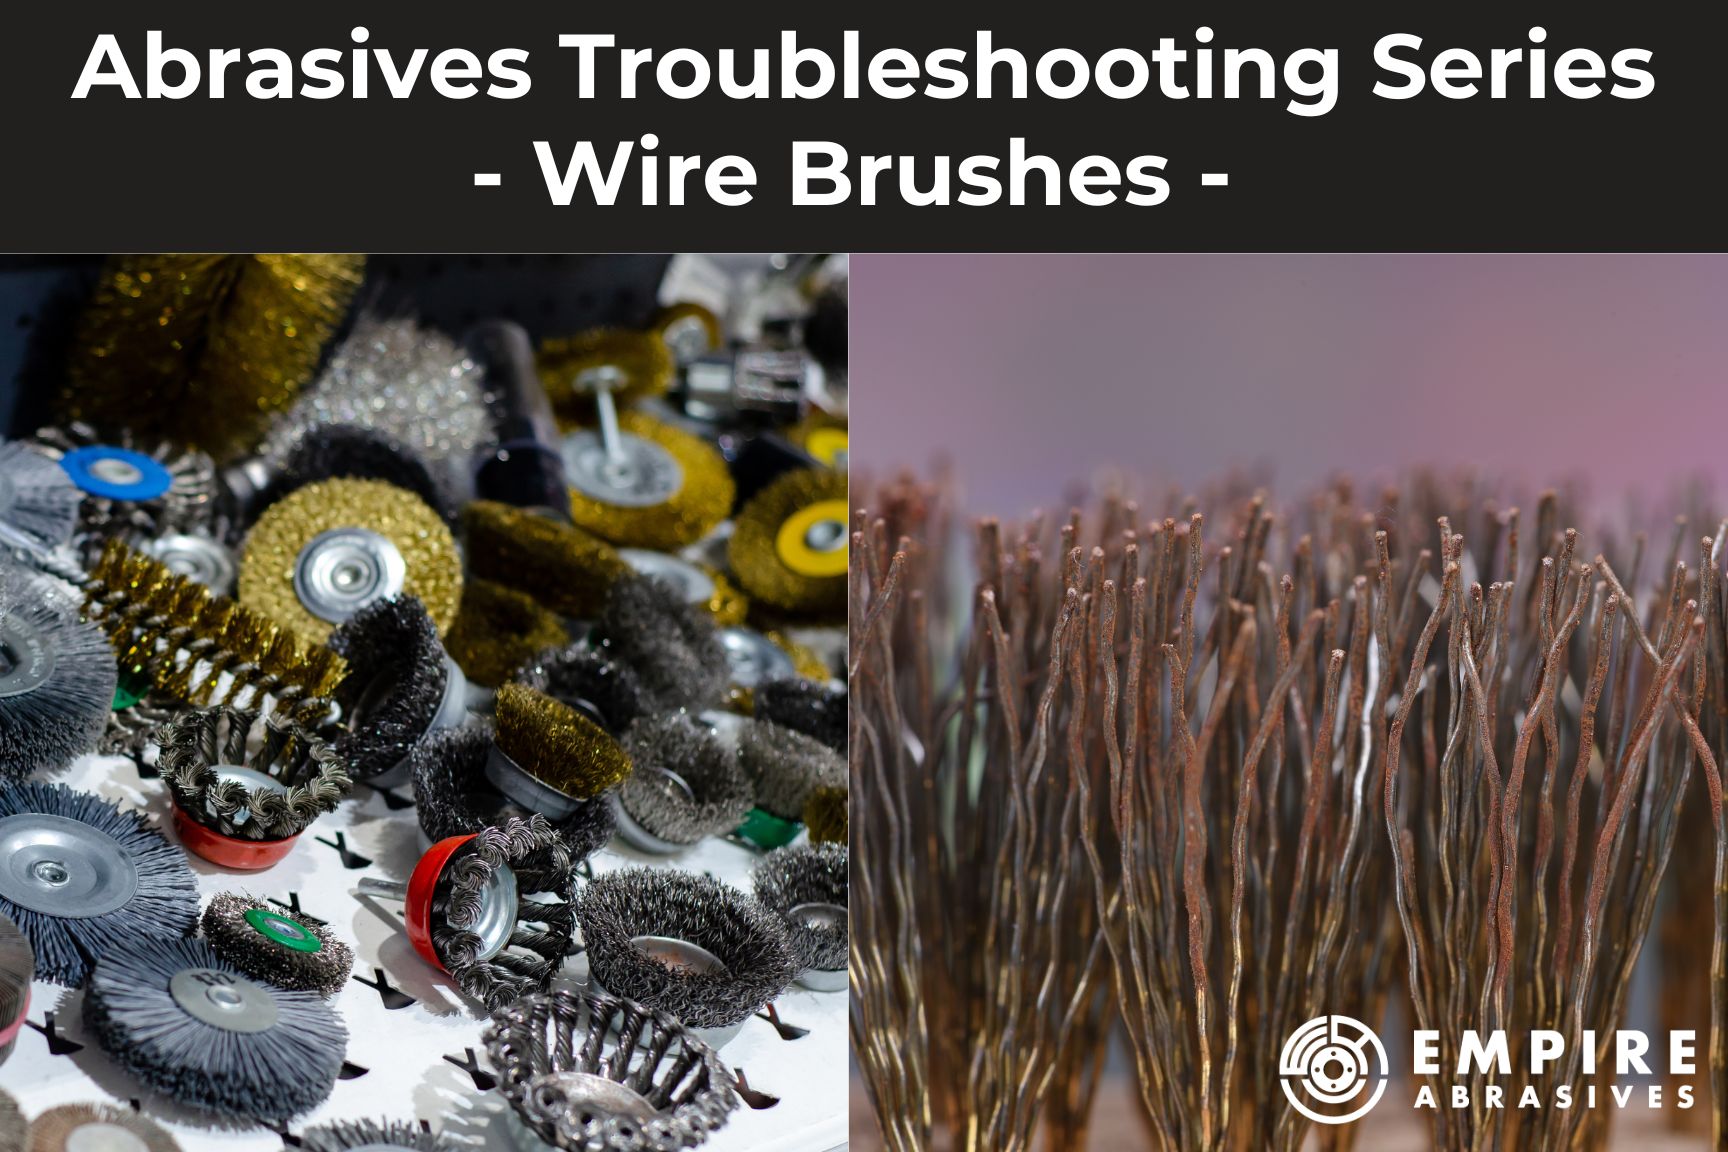 Troubleshooting guide for Wire brush abrasives - wheels, cup brushes, and end brushes